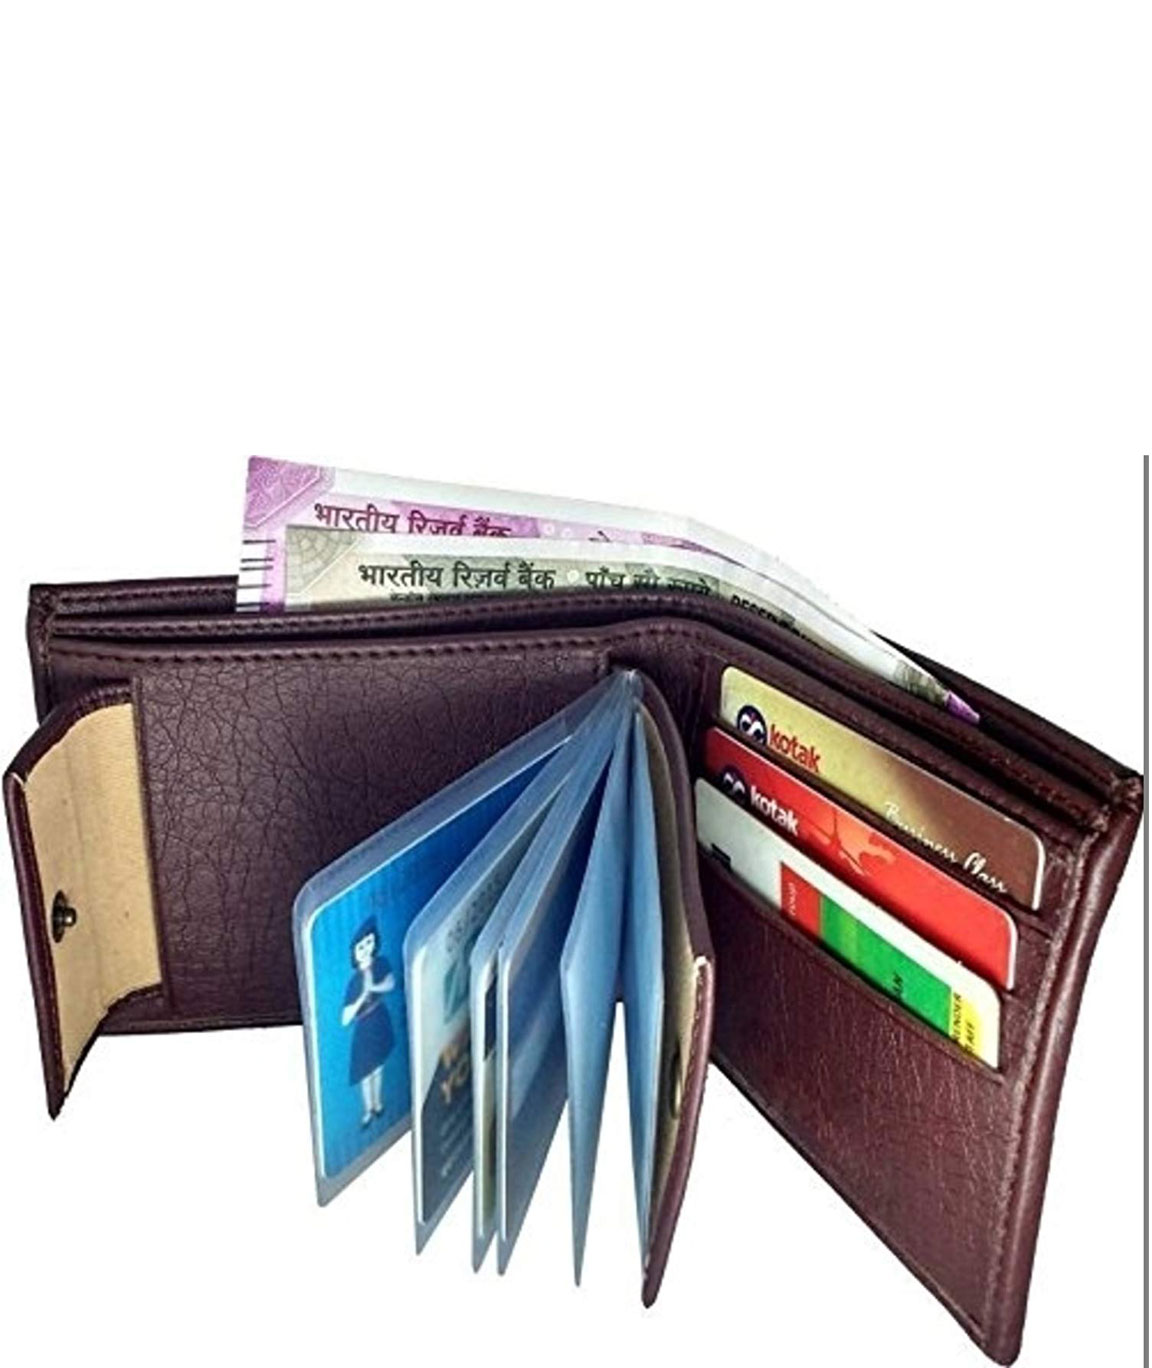 RED GENUINE LEATHER MENS PURSE WALLET MONEY CARD HOLDER SLIM  BI-FOLD-PERFECT CORPORATE, VALENTINE, BIRTHDAY, ANNIVERSARY, THANKSGIVING  GIFT FOR MEN 41 : Amazon.in: Bags, Wallets and Luggage